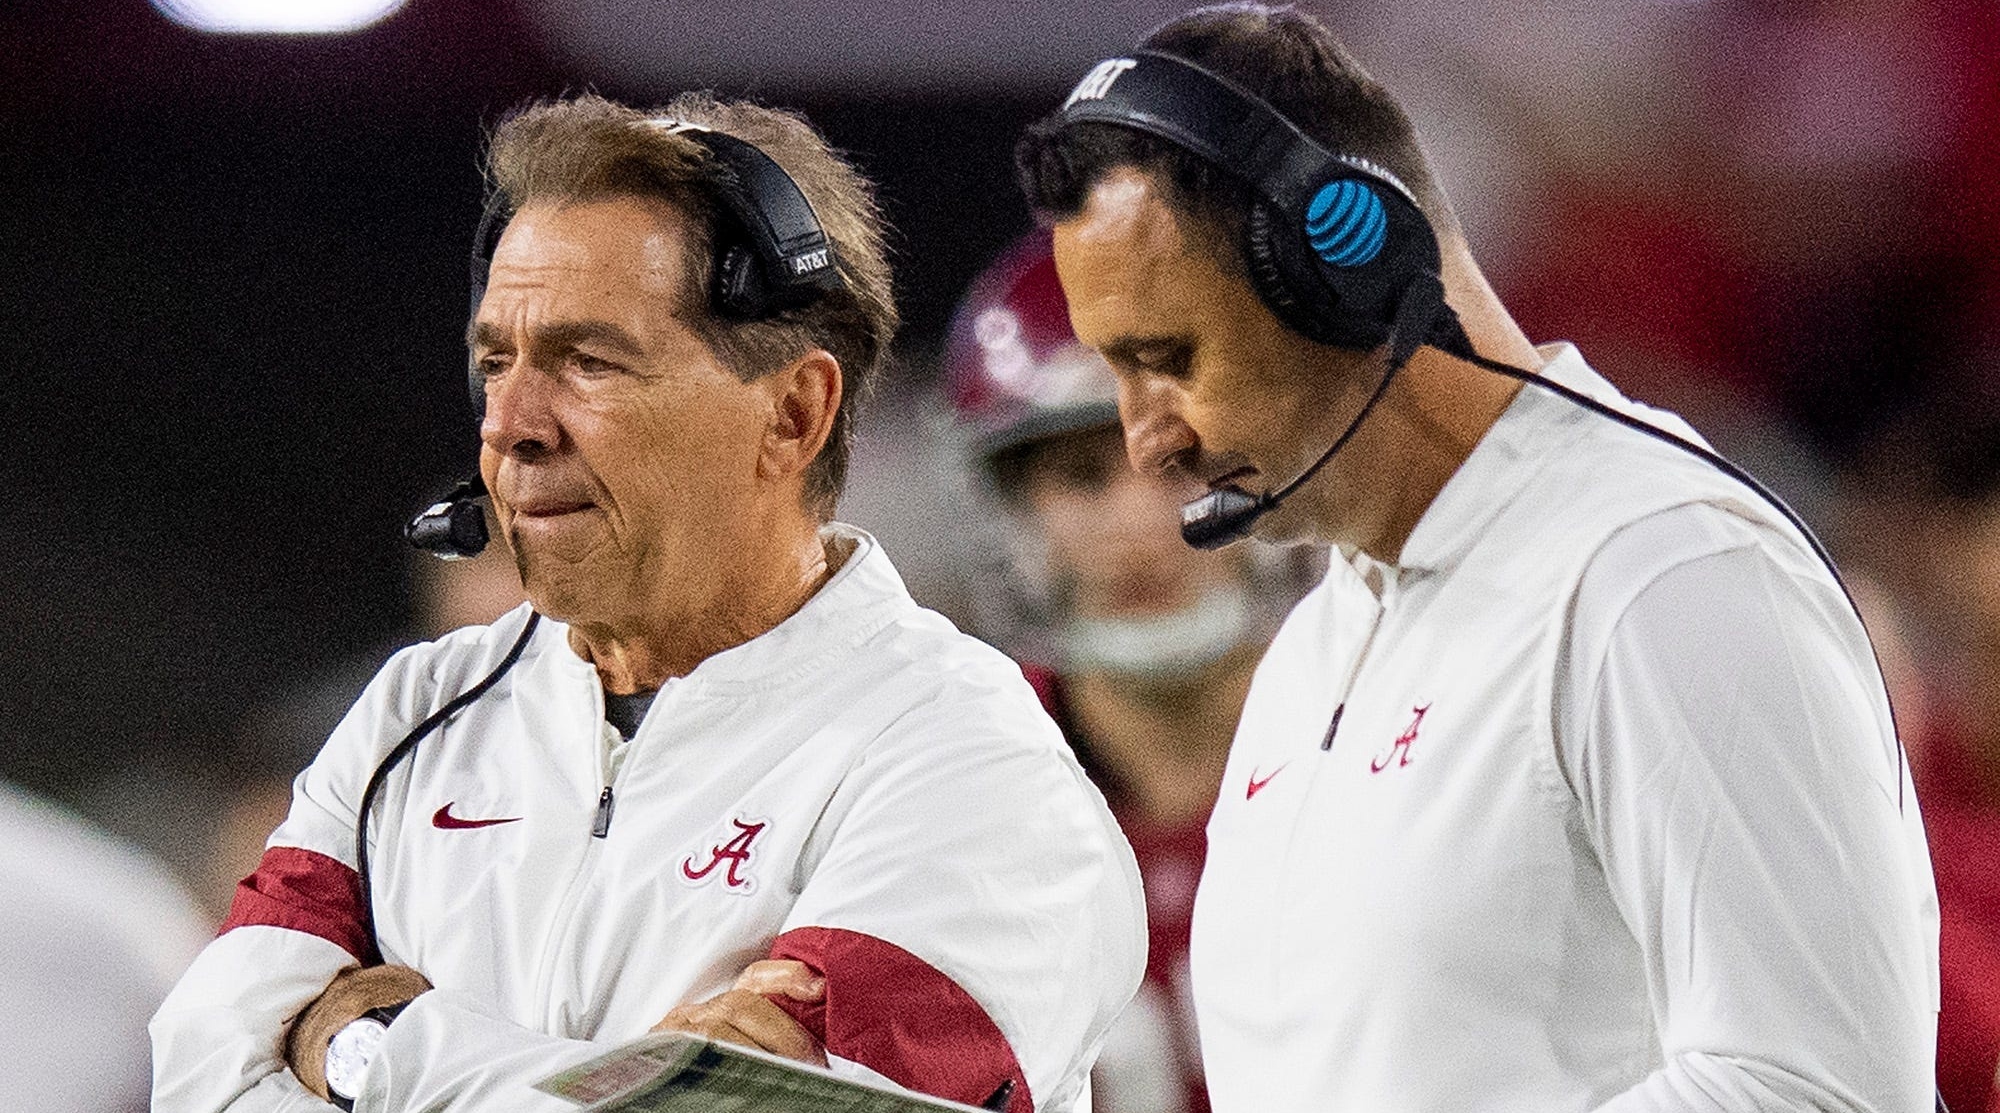 Alabama head coach Nick Saban and then-offensive coordinator Steve Sarkisian confer on the sideline during a game against Arkansas.